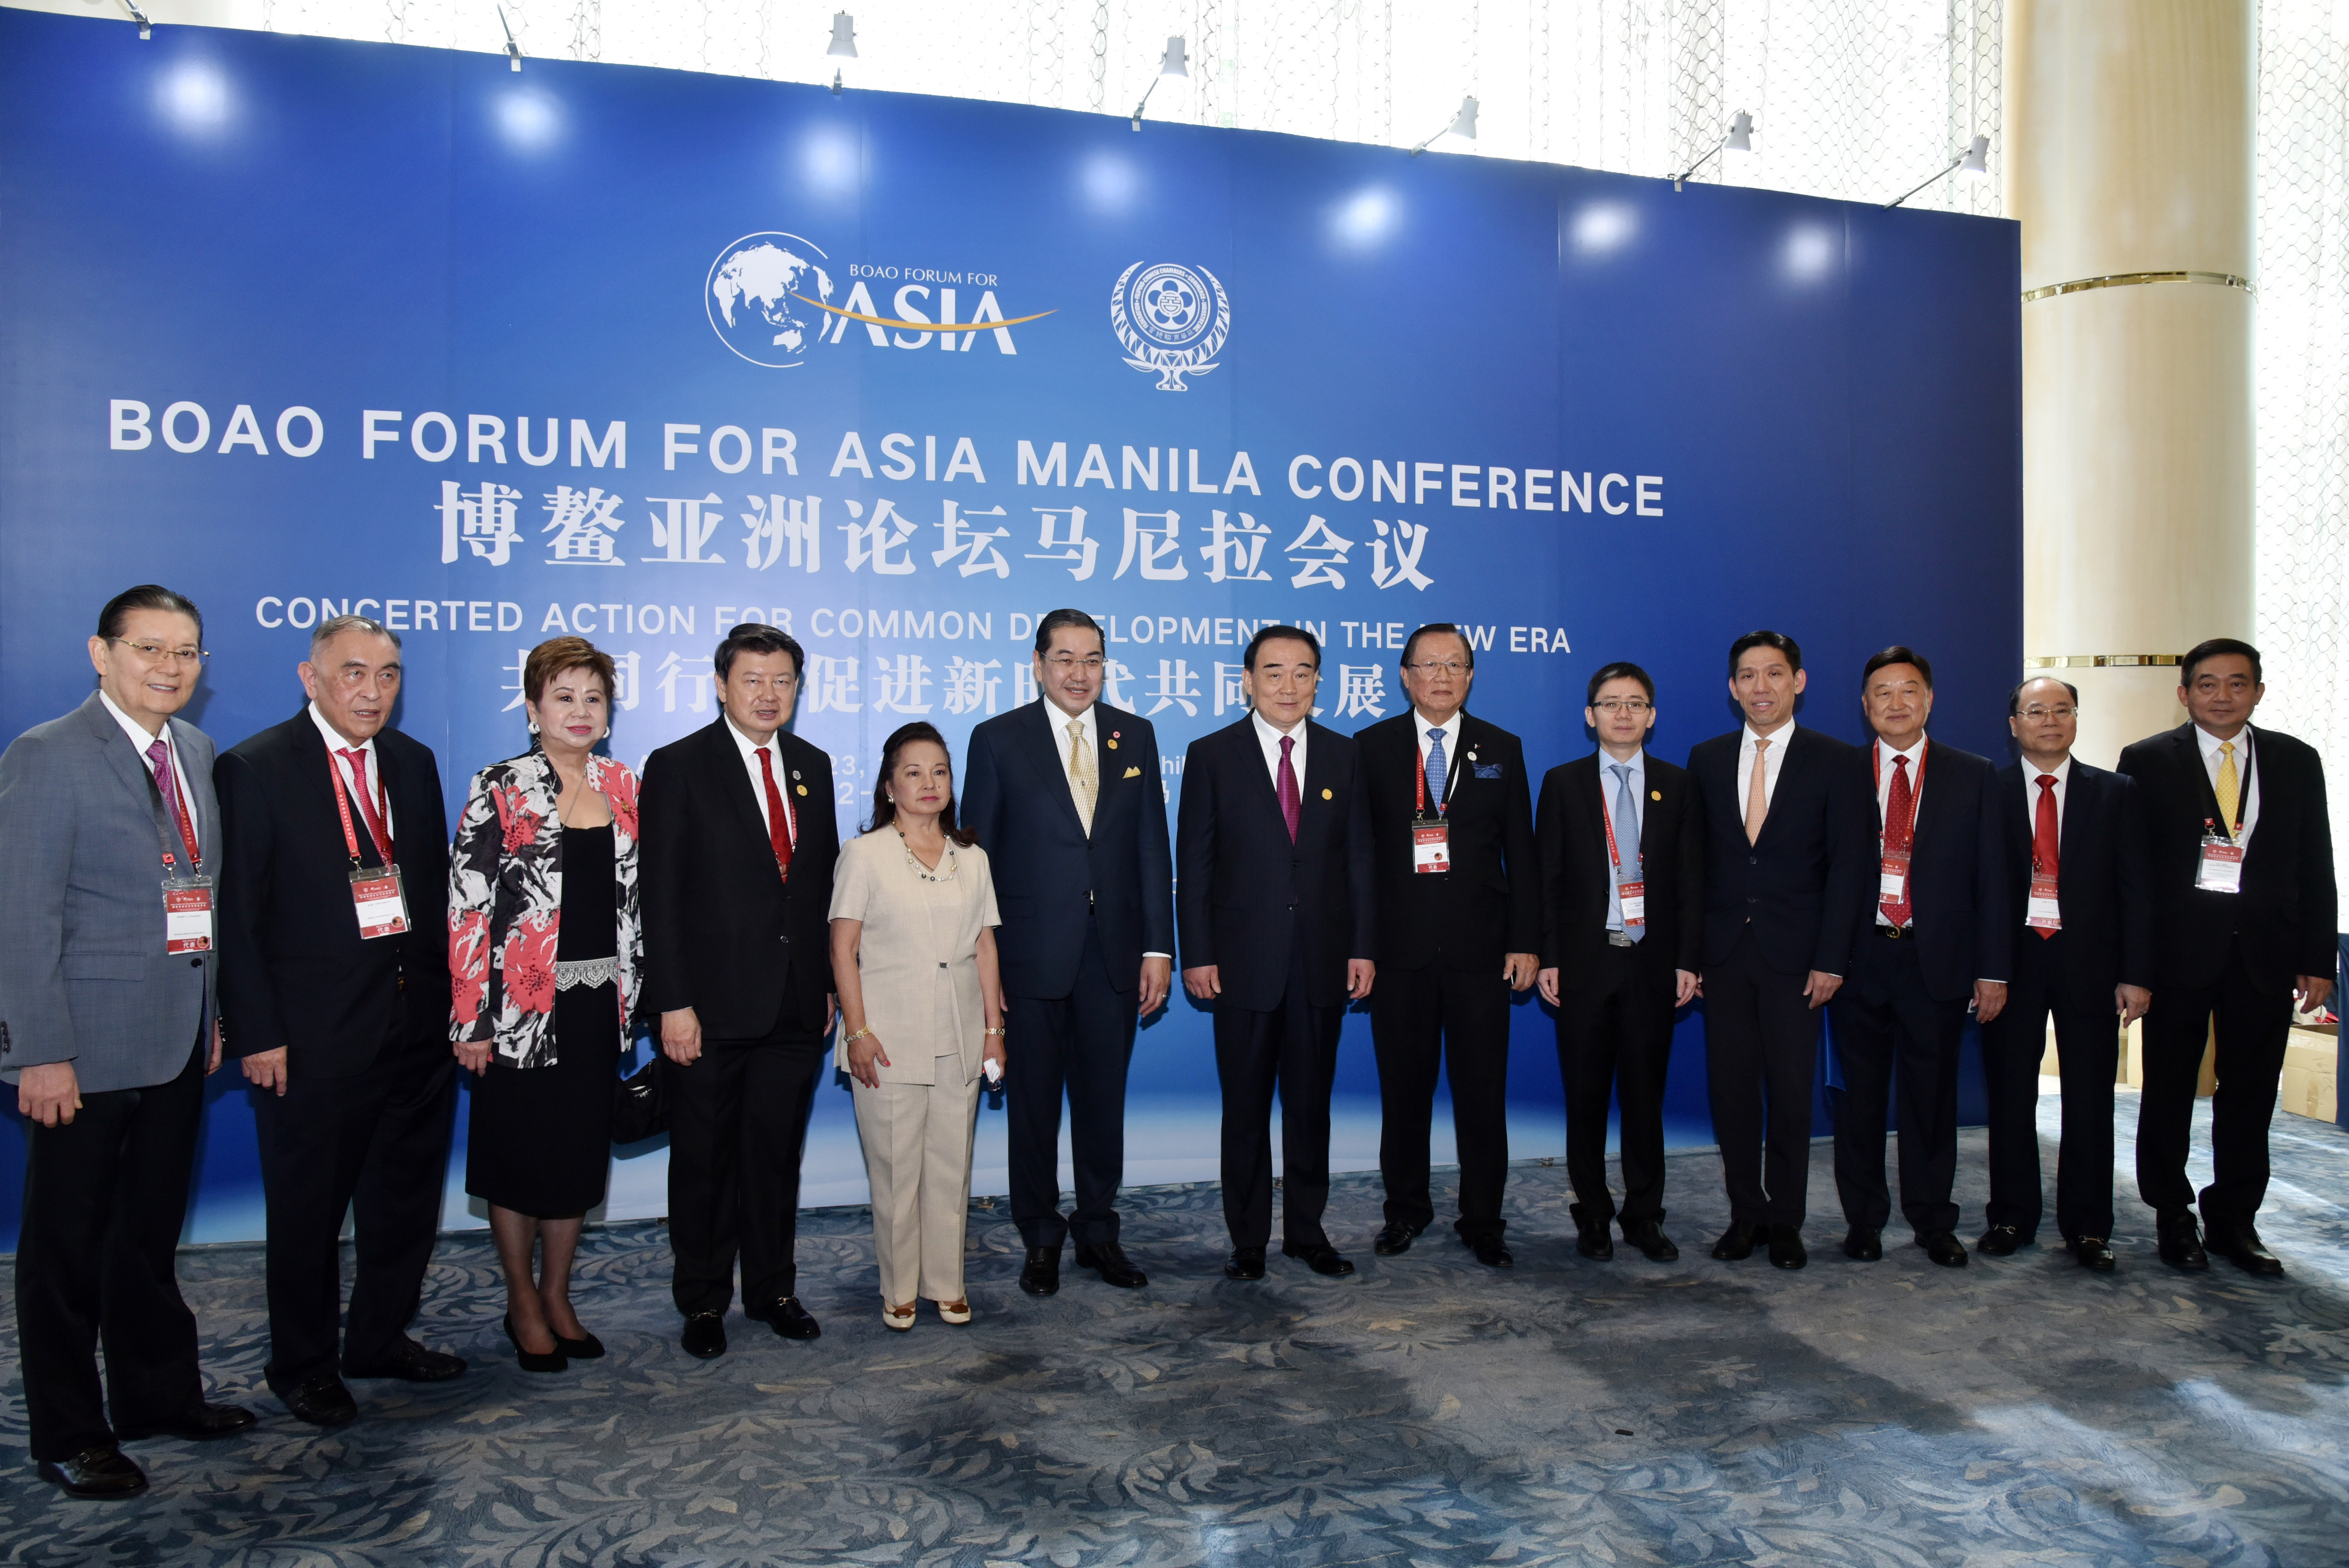 Arroyo to lead first Boao Forum in PH